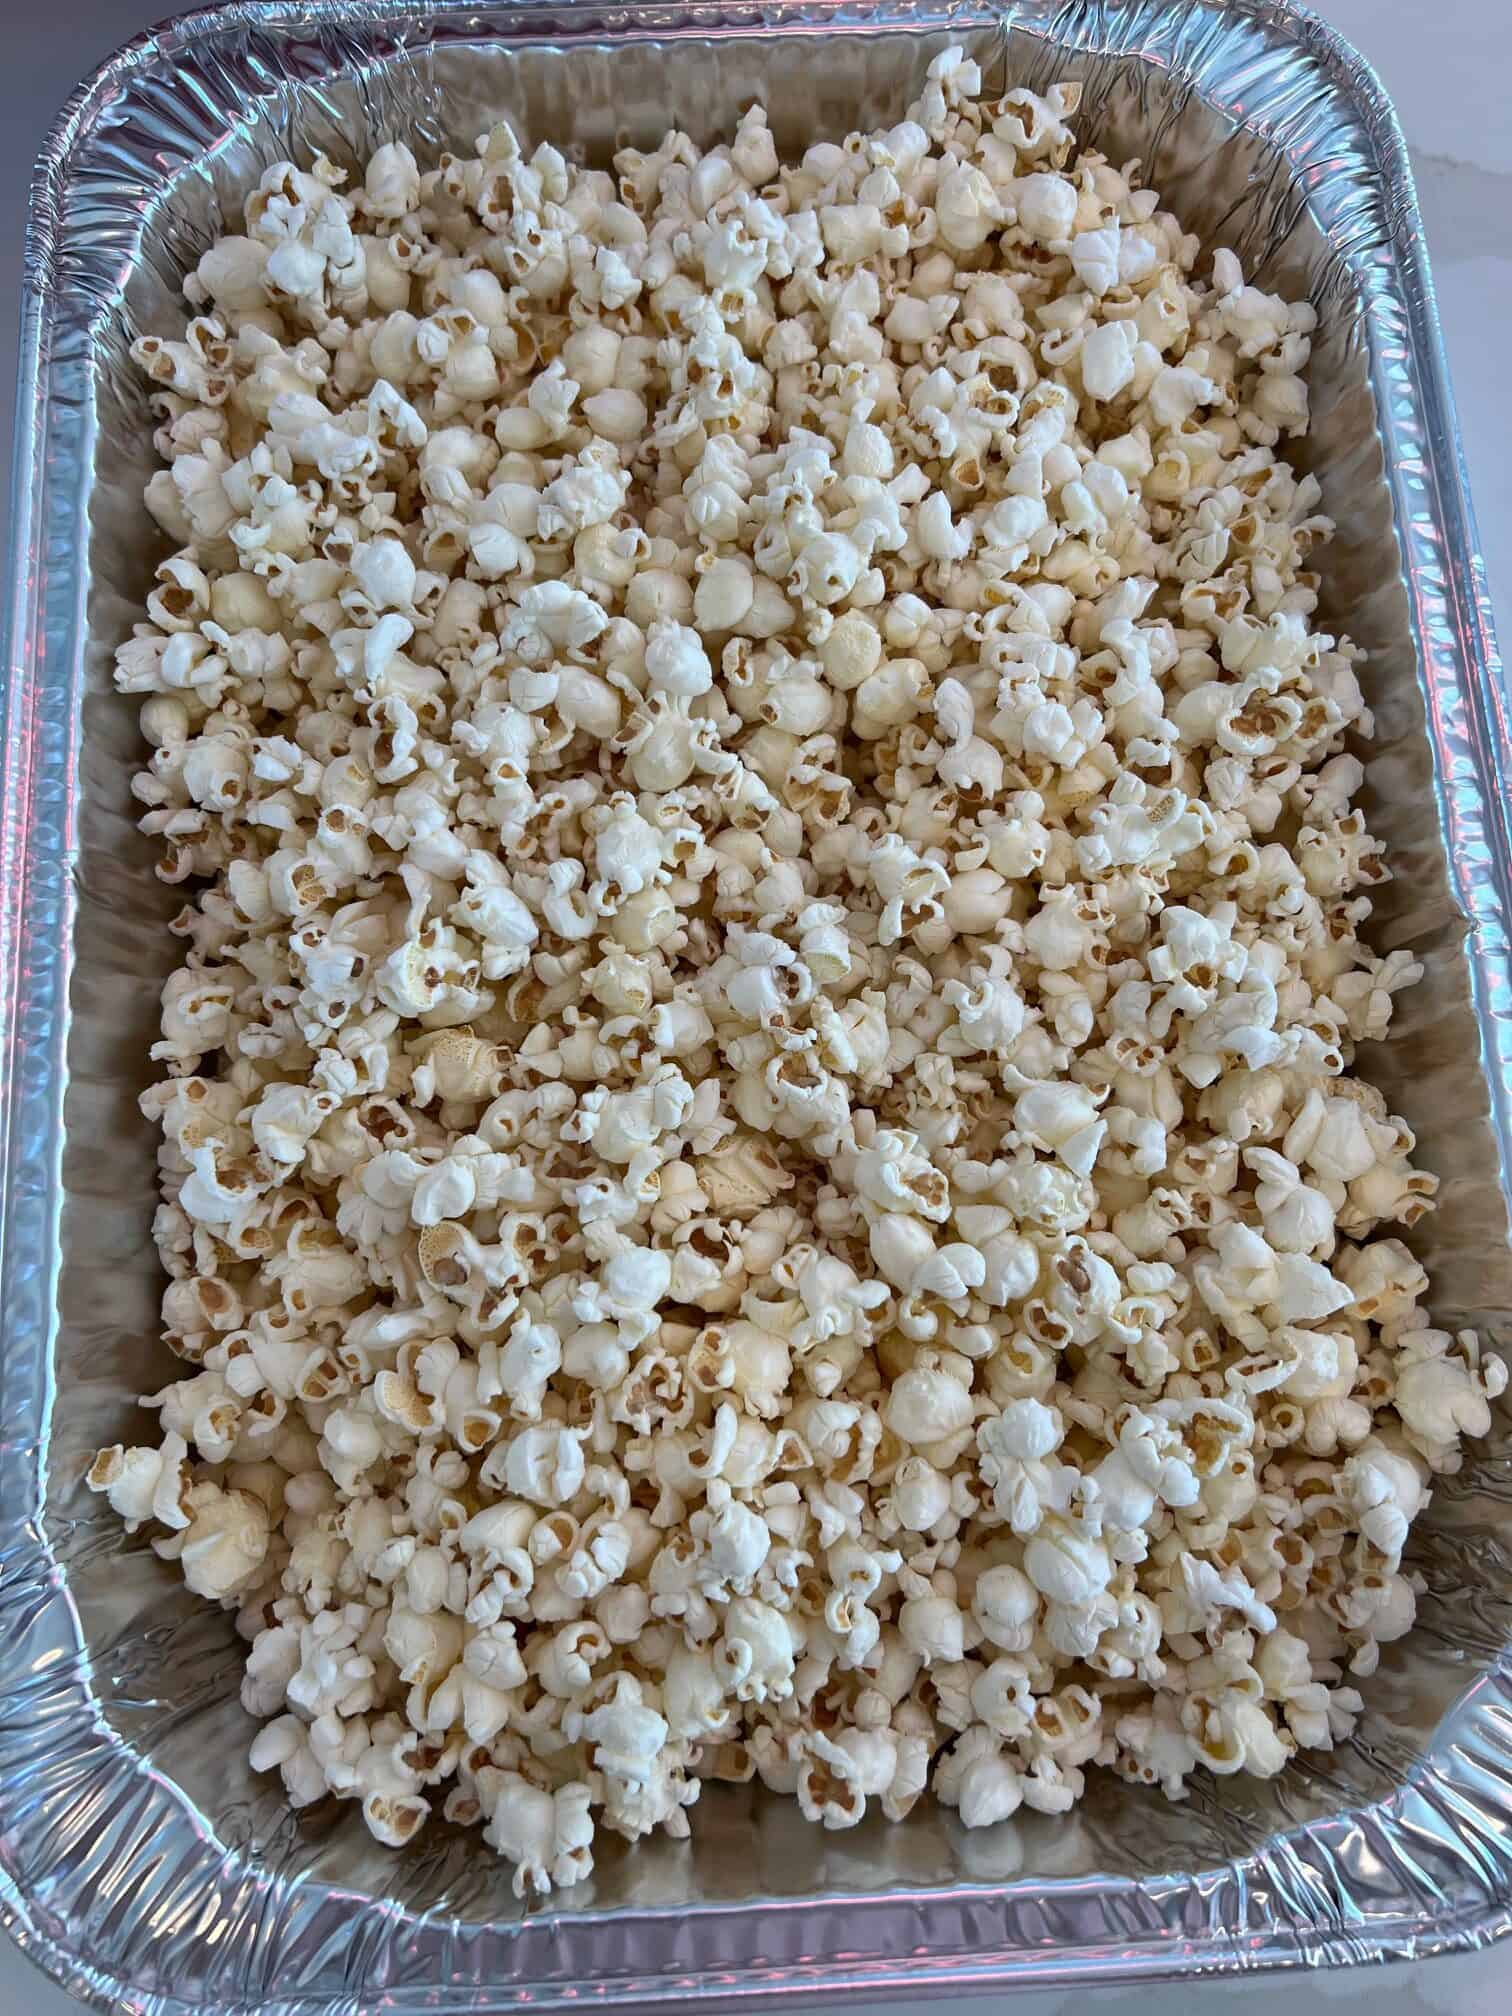 A roasting pan with popped popcorn.